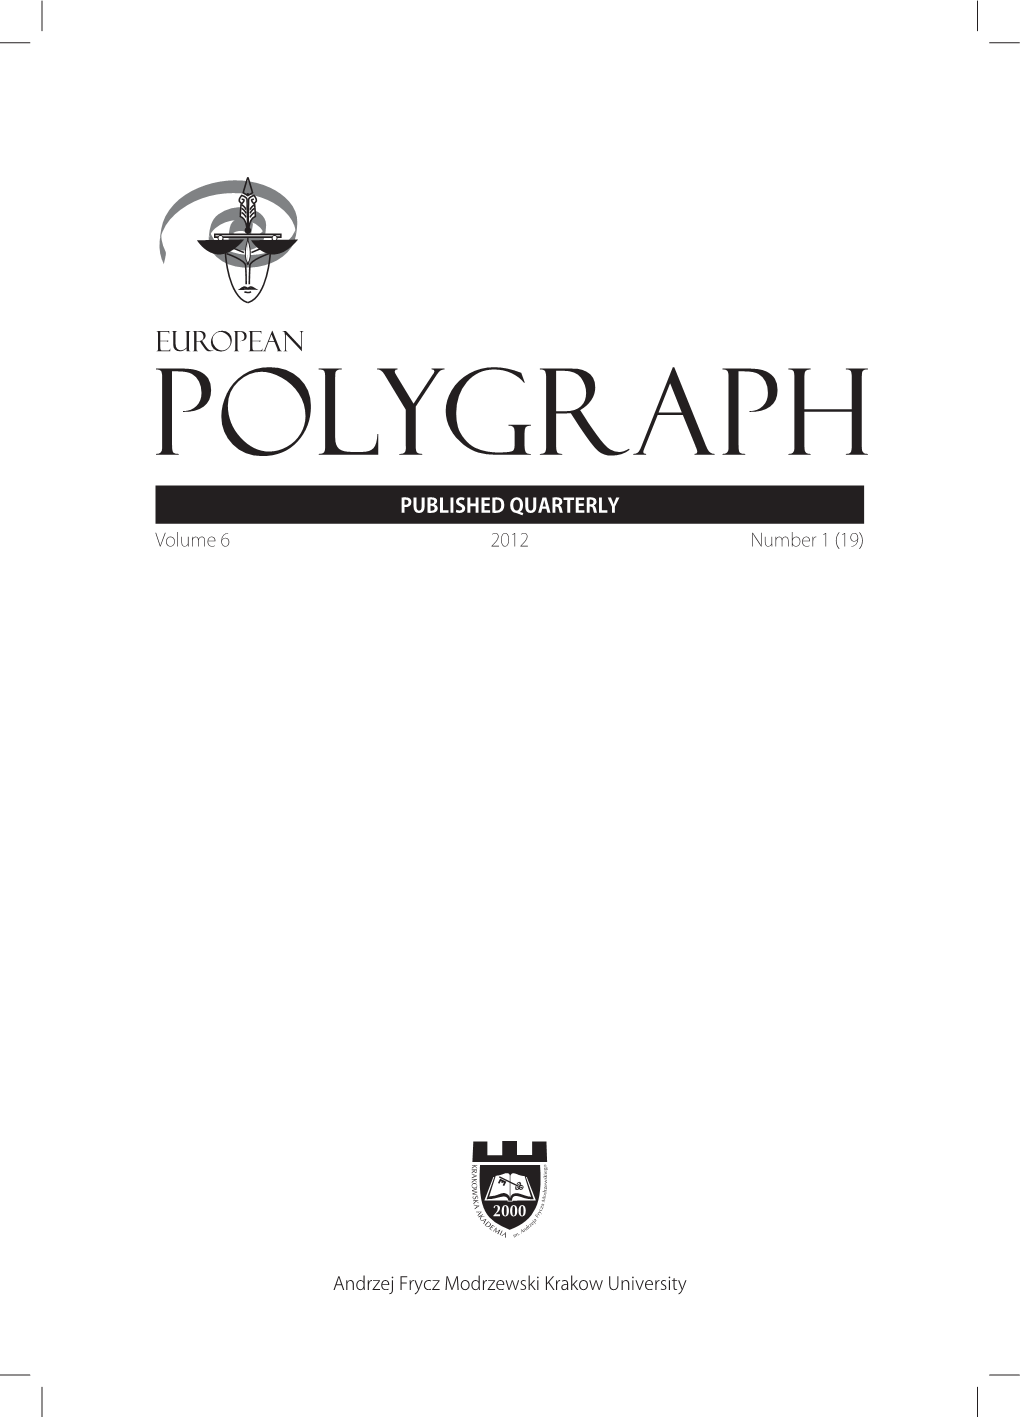 Critique of Meta-Analytic Survey of Criterion Accuracy of Validated Polygraph Techniques Cover Image